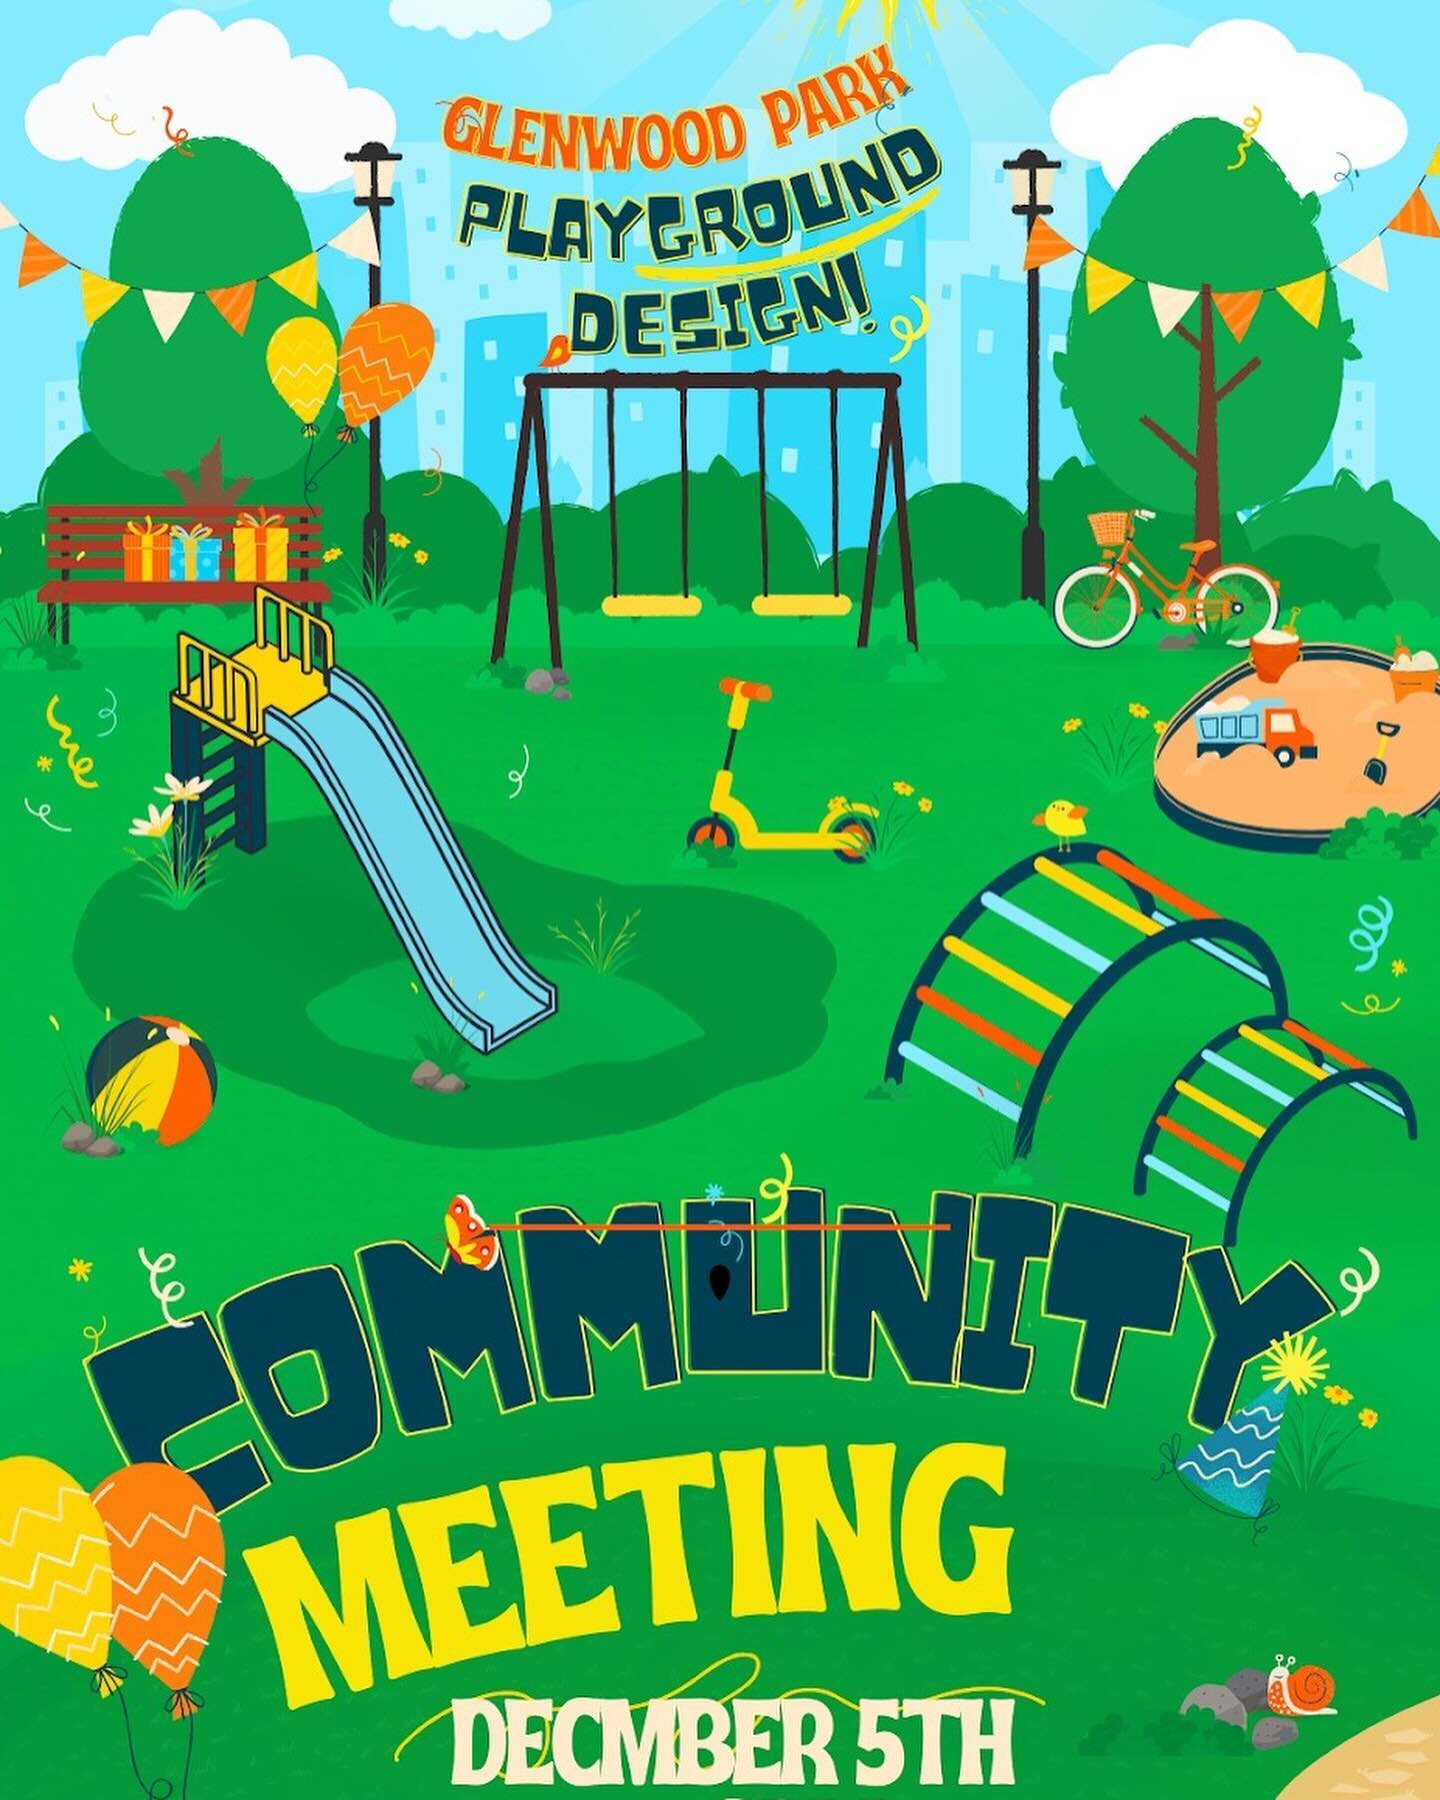 Come join the meeting on December 5th, 6pm, at Kent Library regarding plan review of Glenwood Park walking path and playground design. 

The City of Toledo Director of parks and Councilwoman McPhearson will be available to answer any questions.

Plea